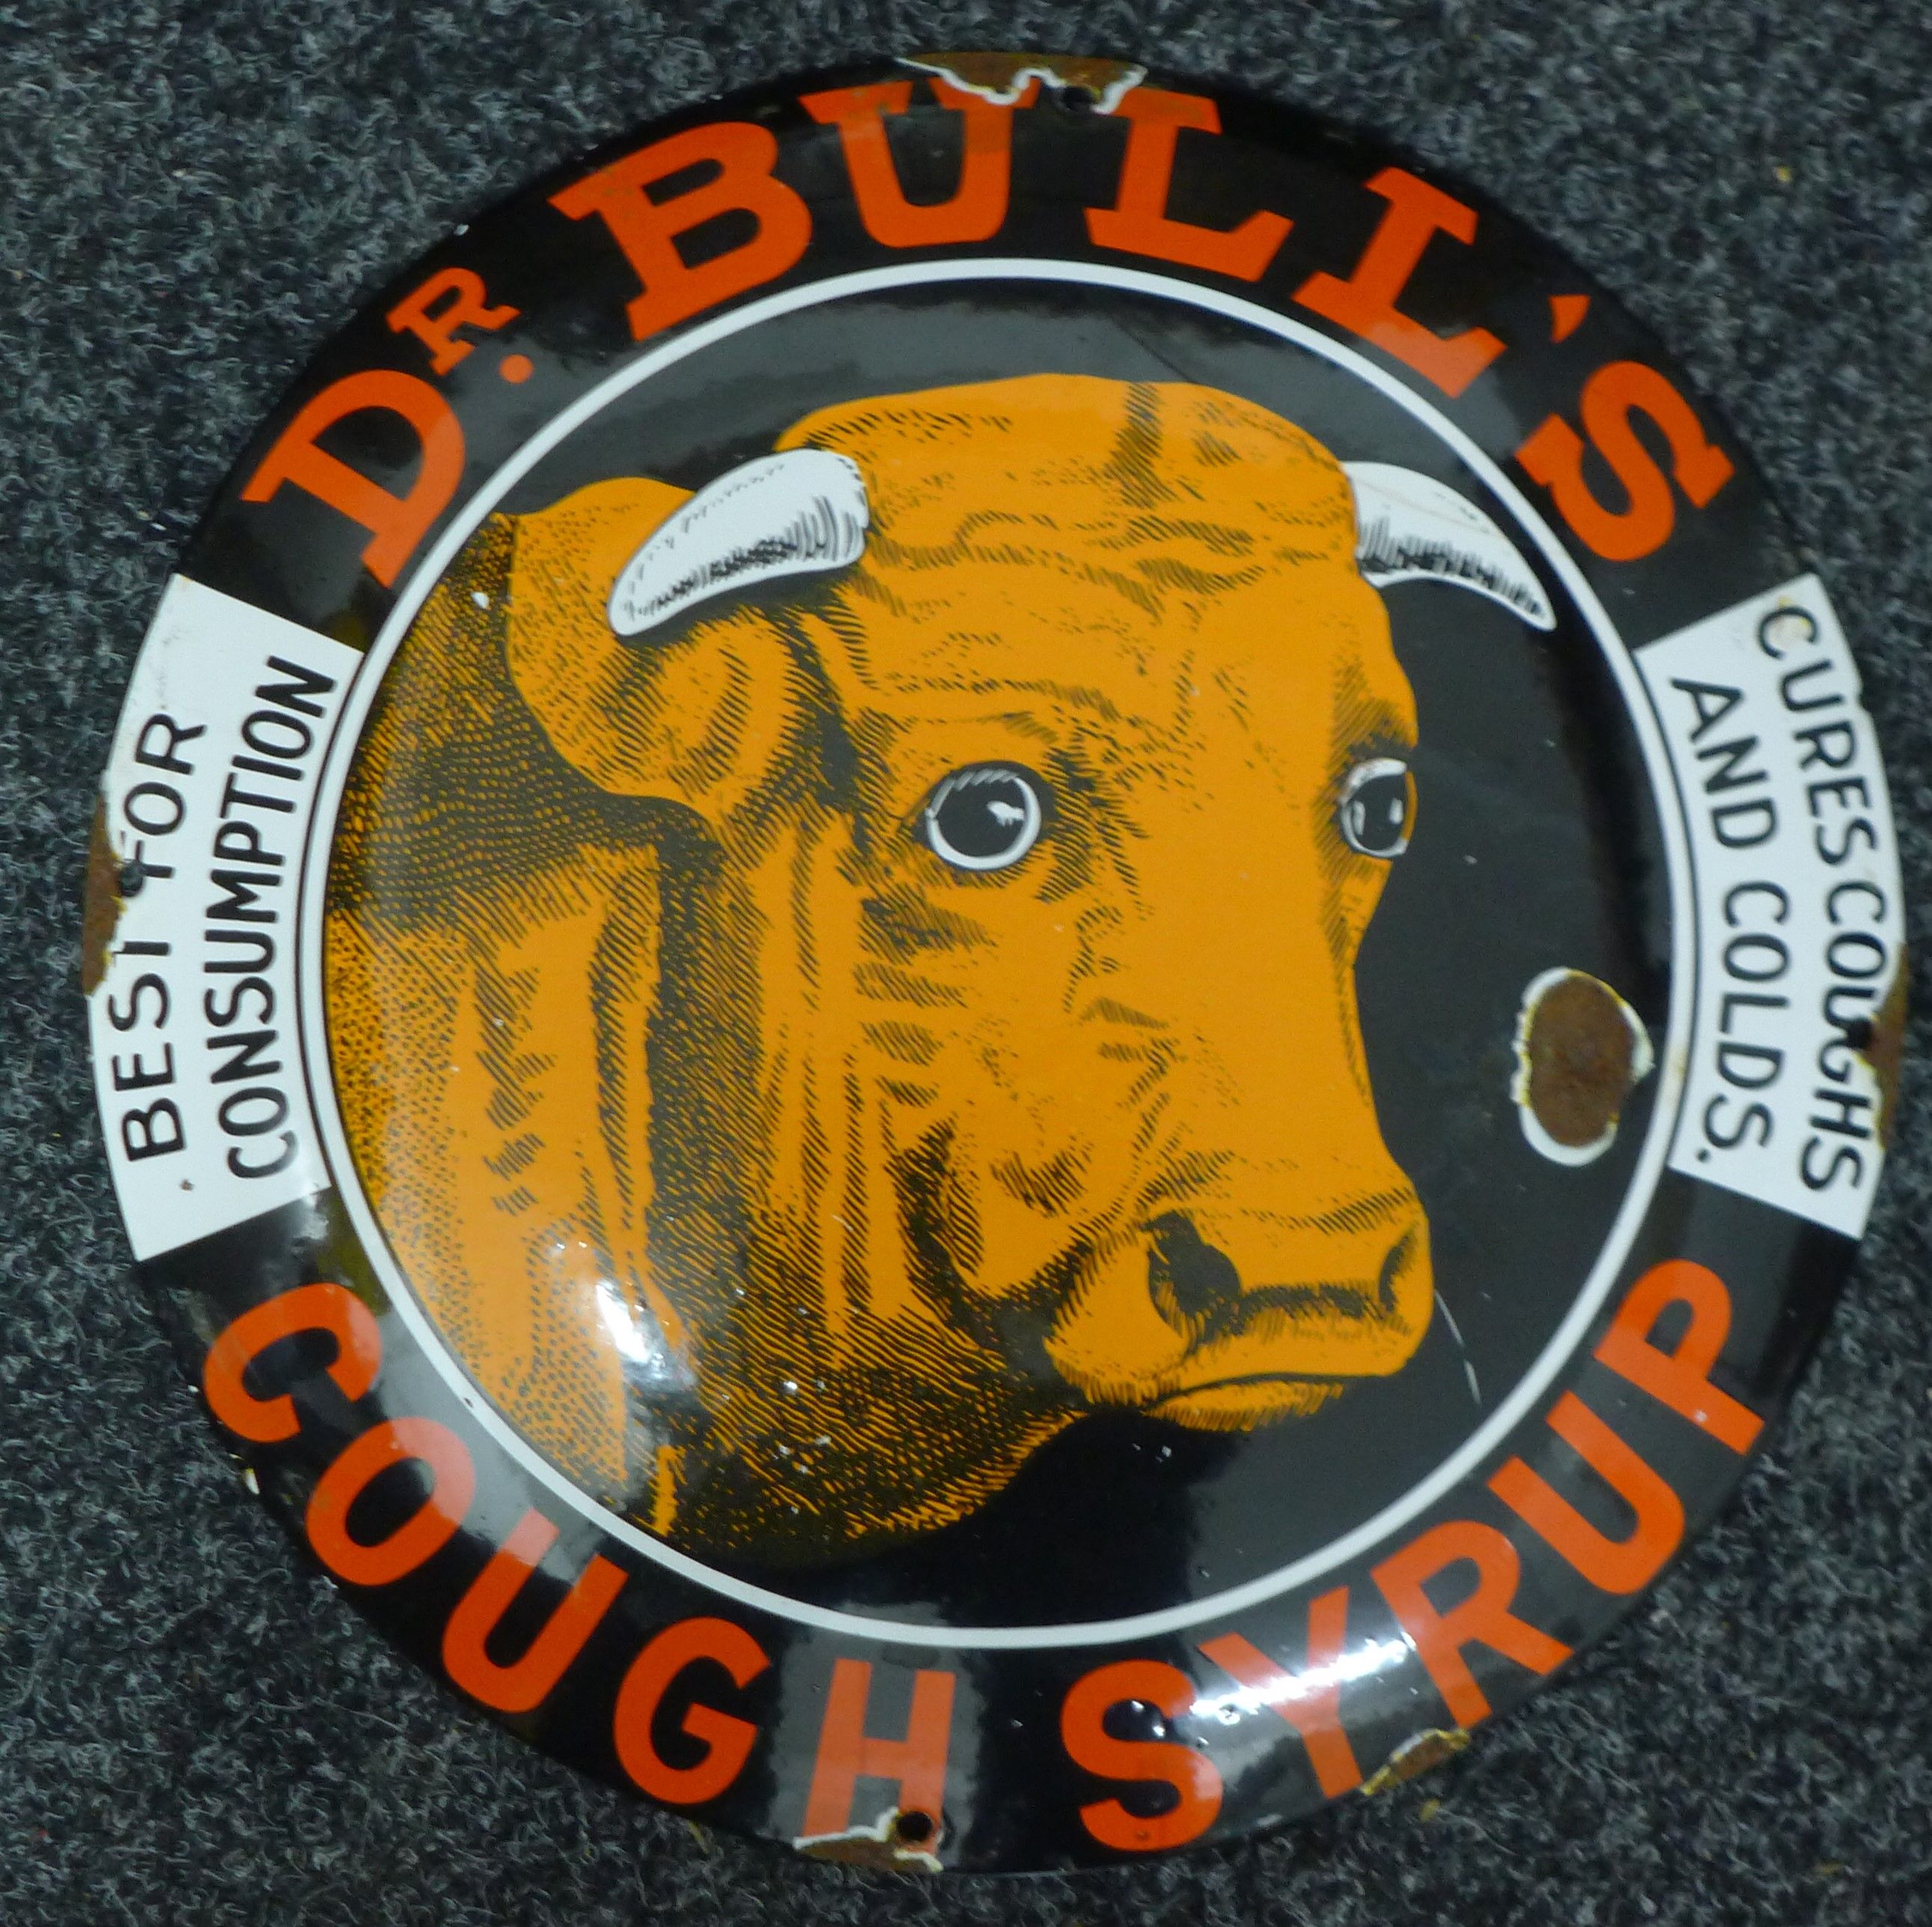 A Doctor Bull's Cough Syrup enamel sign. 29 cm diameter.